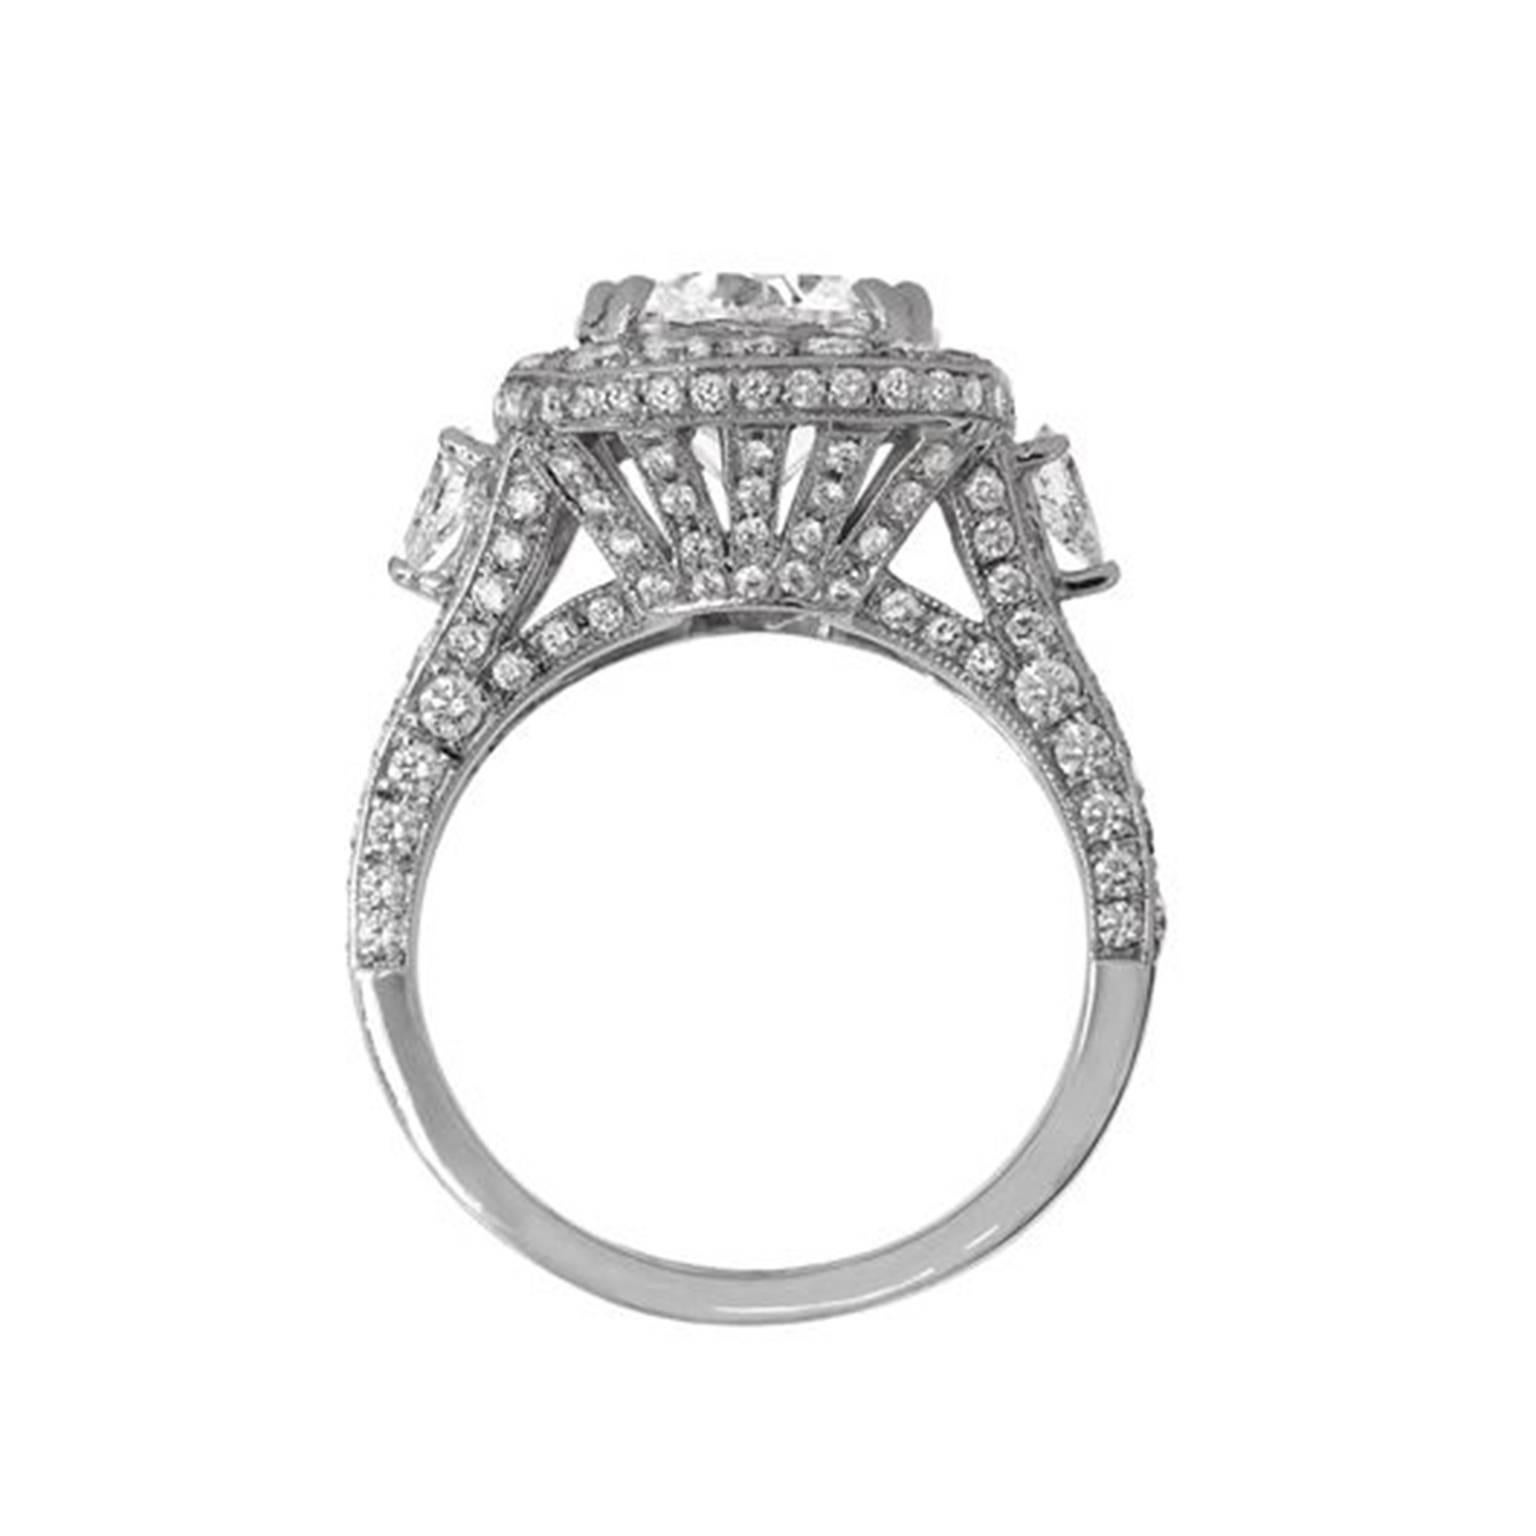 Beautiful 18kt White Gold Engagement Ring features EGL Certified 3.01ct E-SI2 Round Diamond set in diamond filigree with two Pear Shapes, features 2.00ct of diamonds. Comes in 6 size.